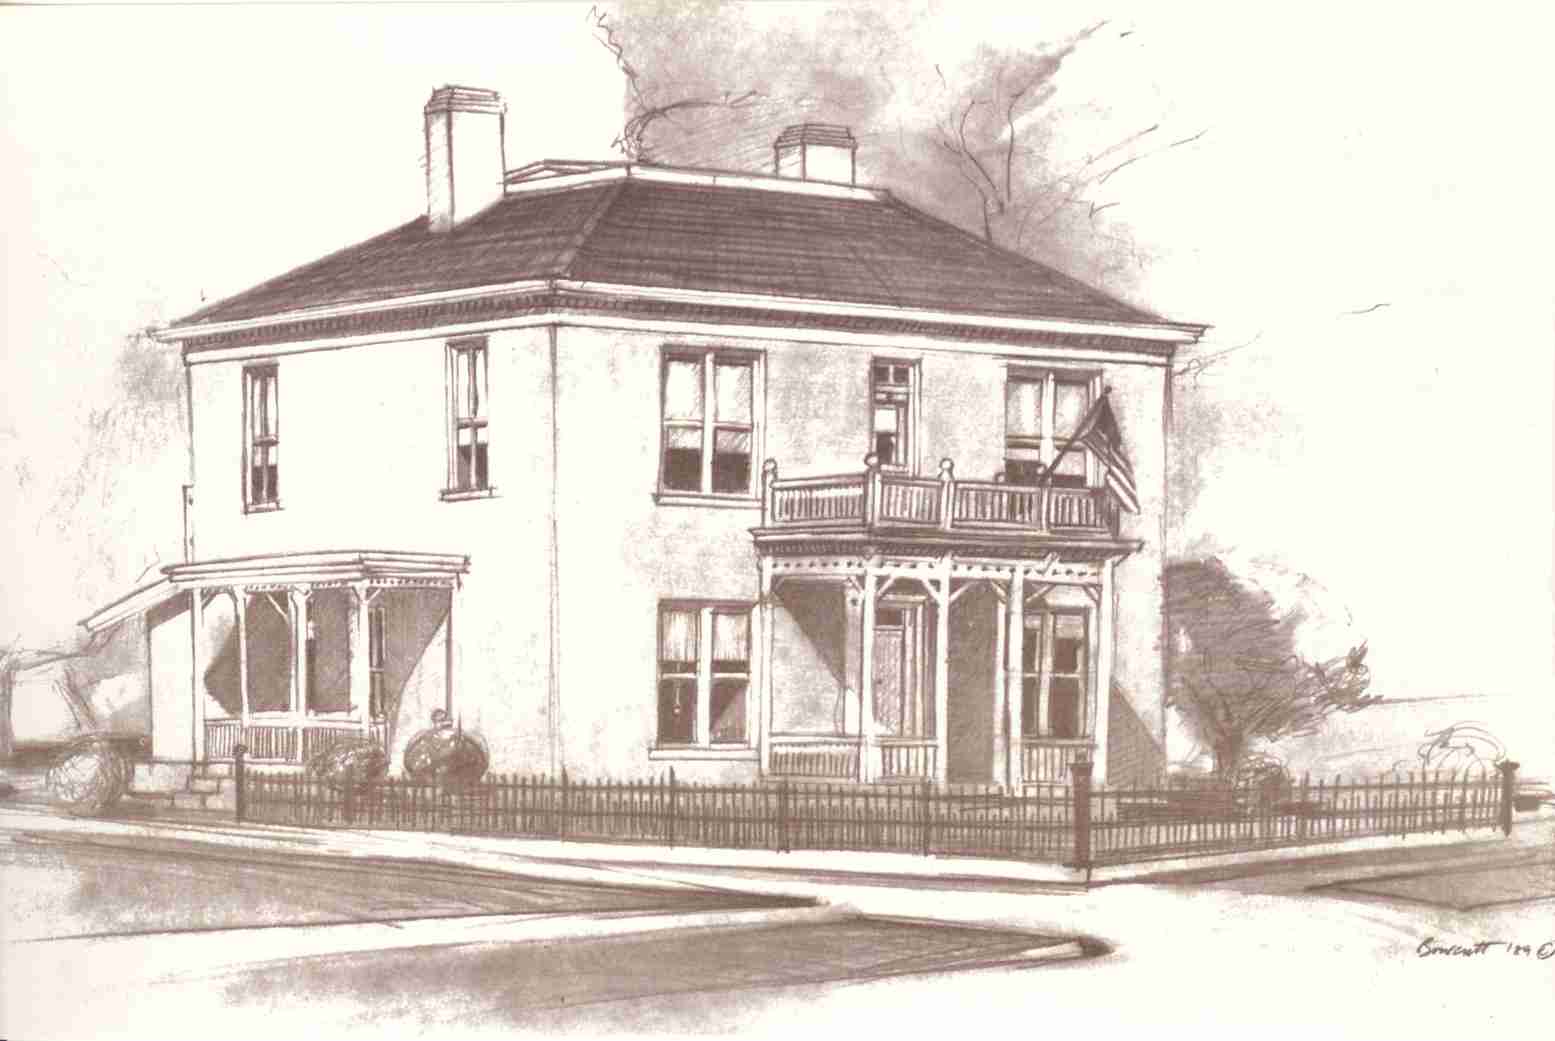 Sketch of the George Whitehead Home